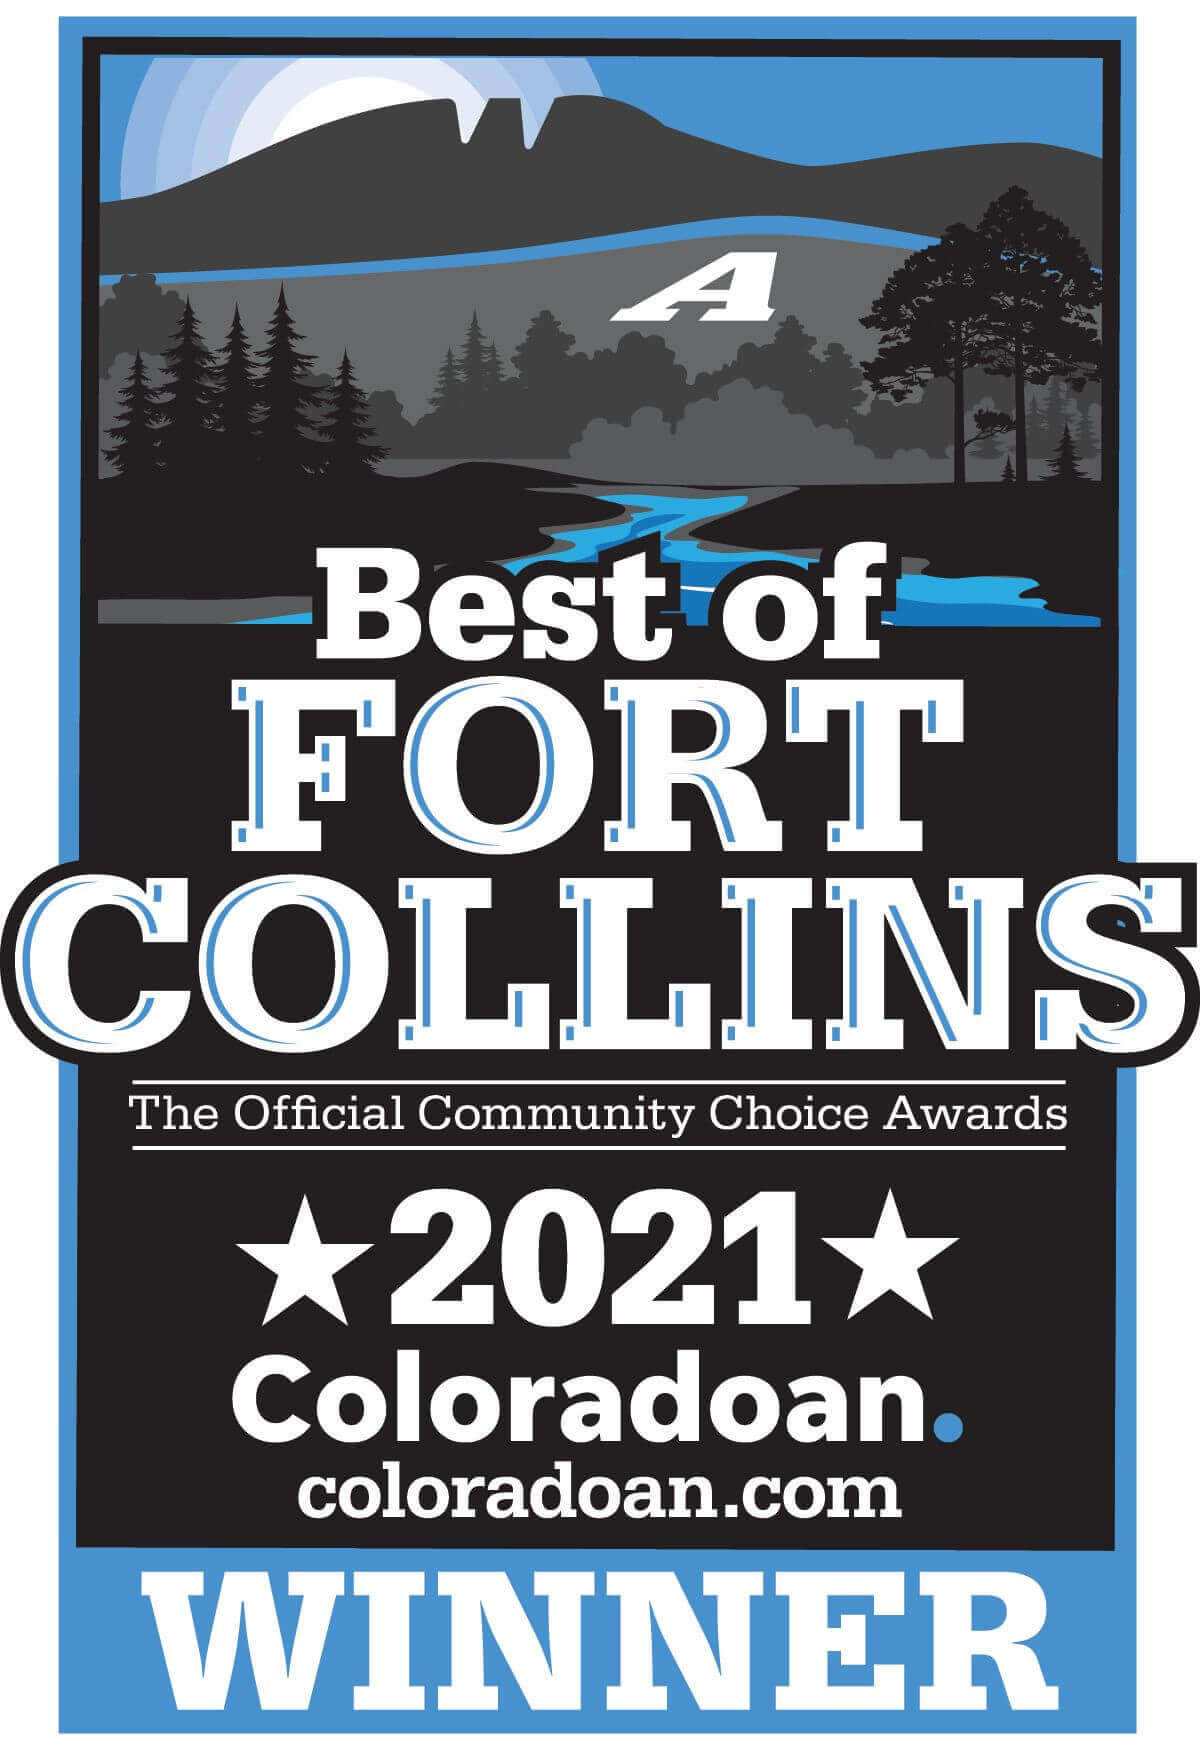 Best of Fort Collins award in Northern Colorado